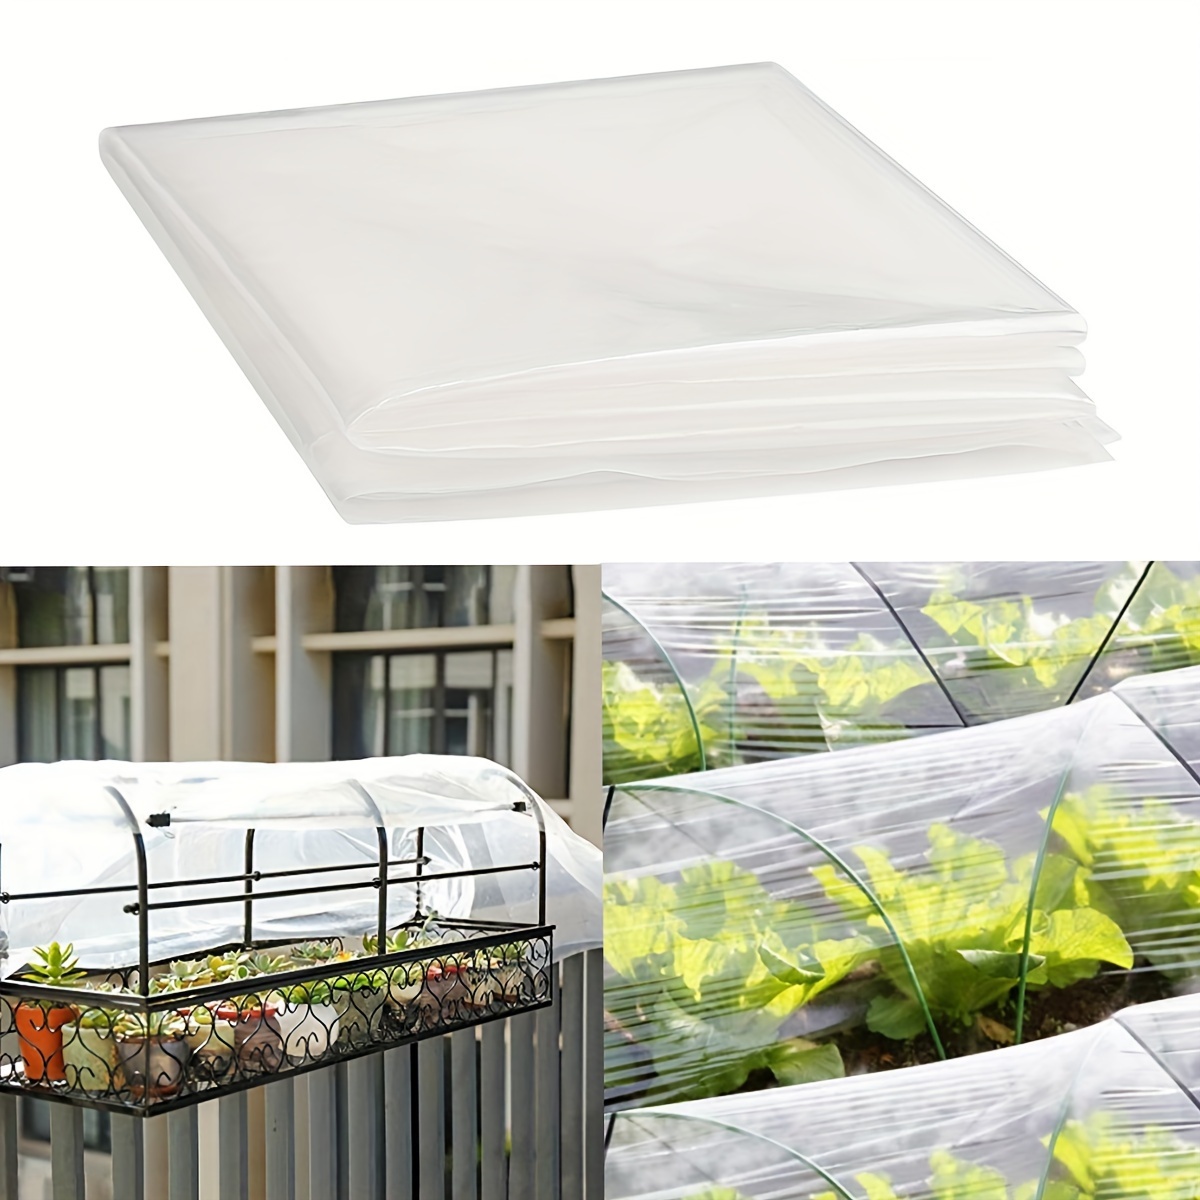 Durable Pe Protective Film For Consistently Covering Items